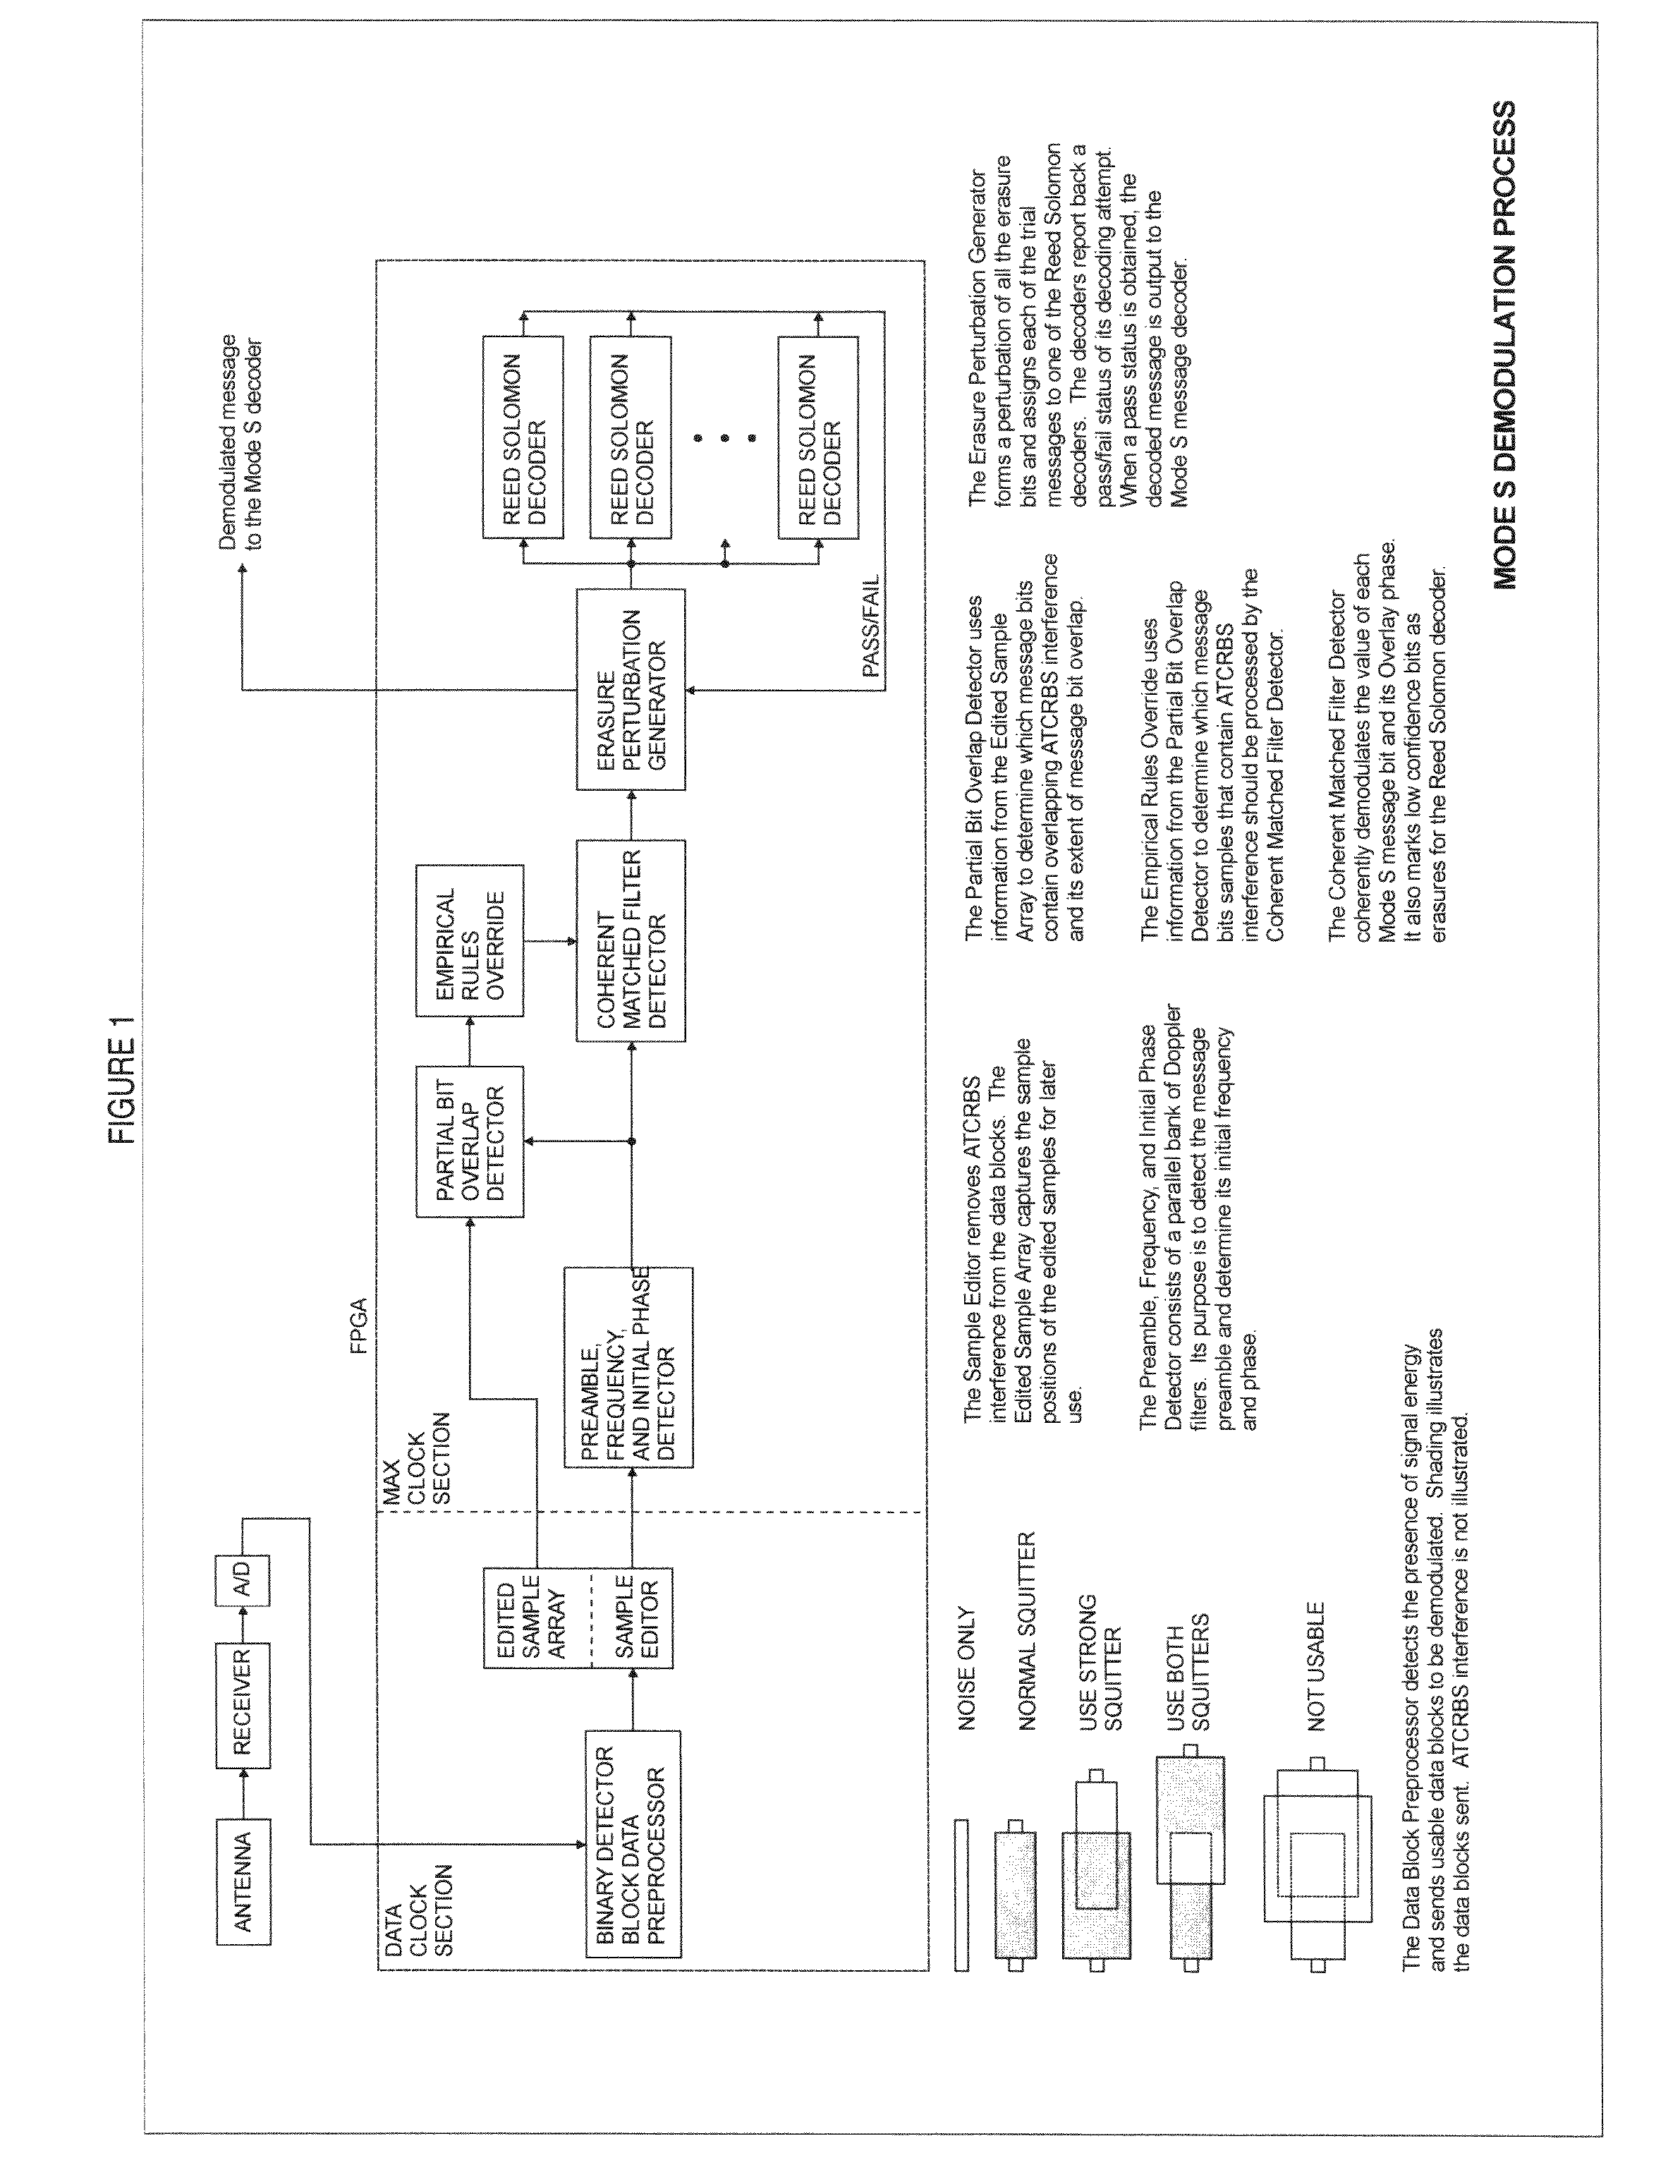 Systems and methods for demodulating multiply-modulated communications signals